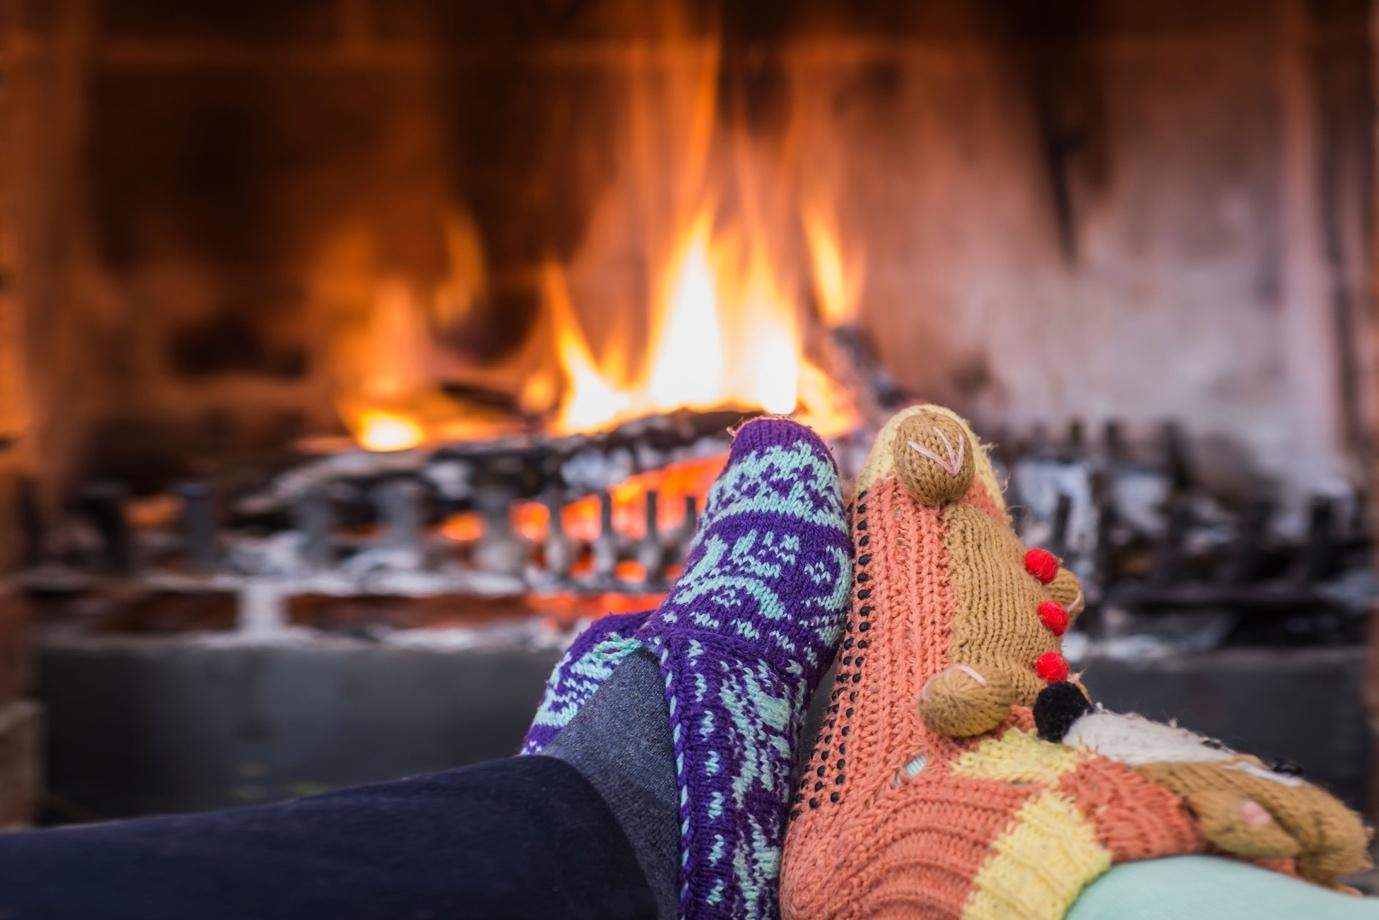 A Guide To The Treatments Of Cold Feet During Cold Weather